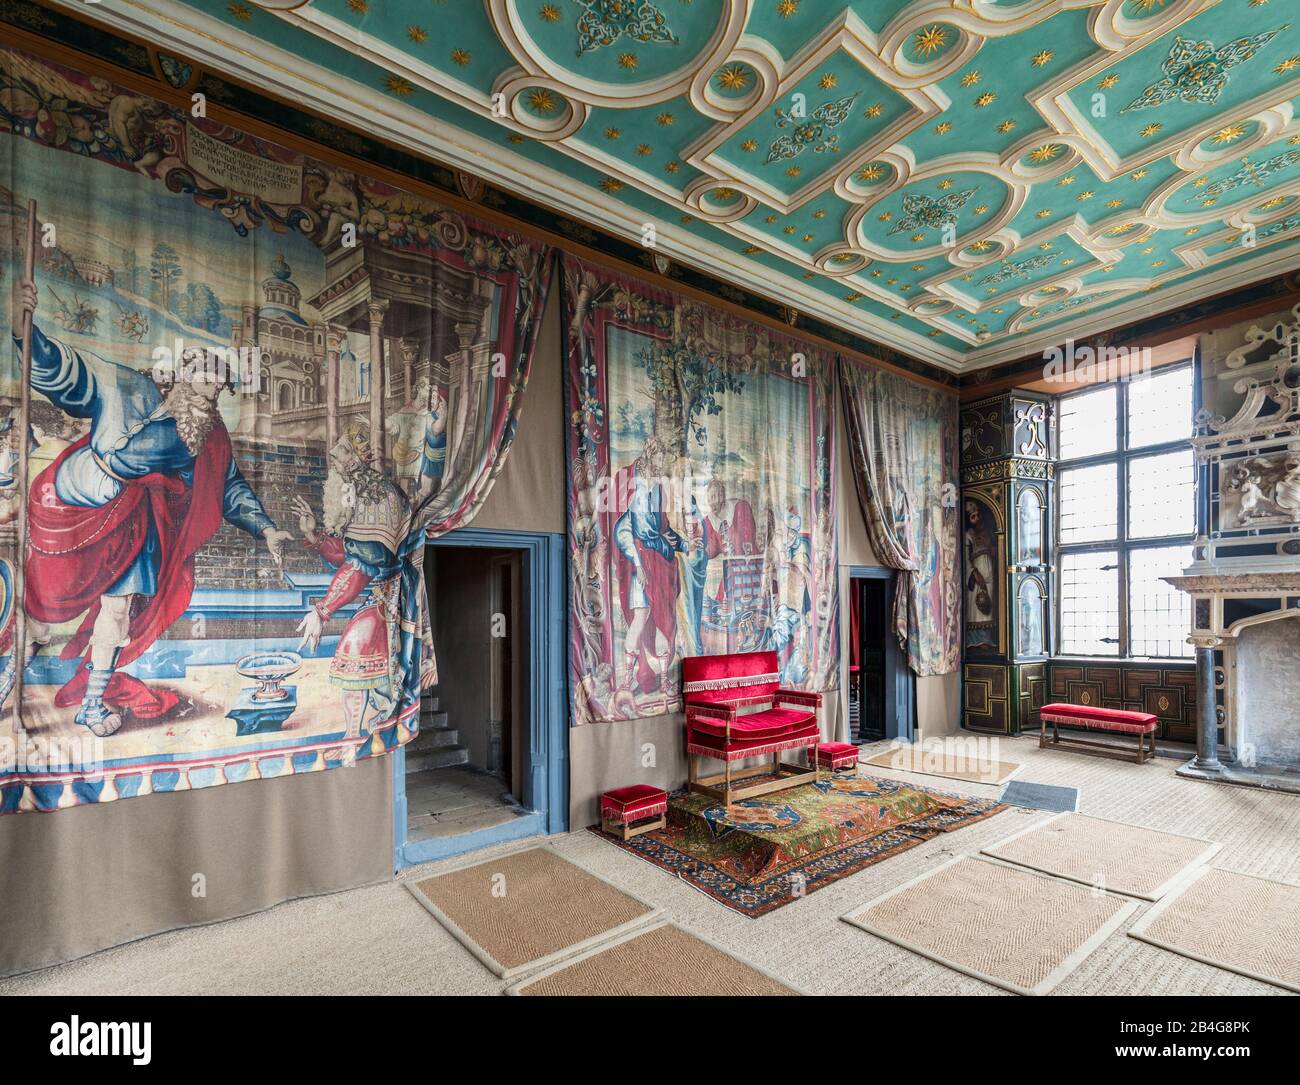 Furnished room with tapestries, Bolsover Castle, Leicestershire, England, UK Stock Photo